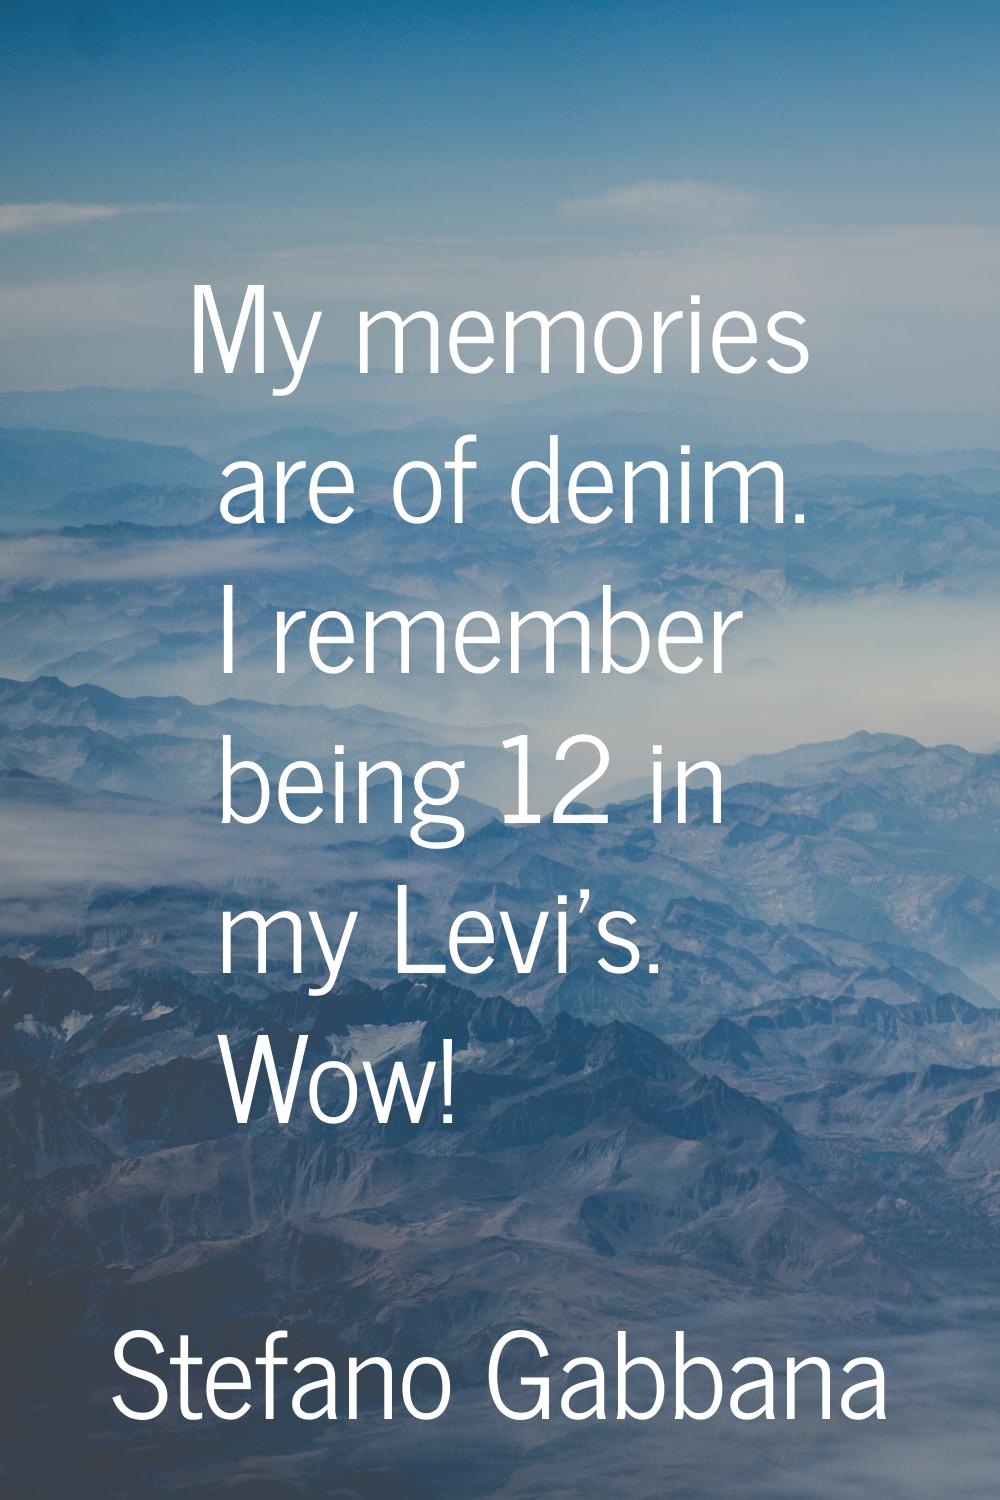 My memories are of denim. I remember being 12 in my Levi's. Wow!